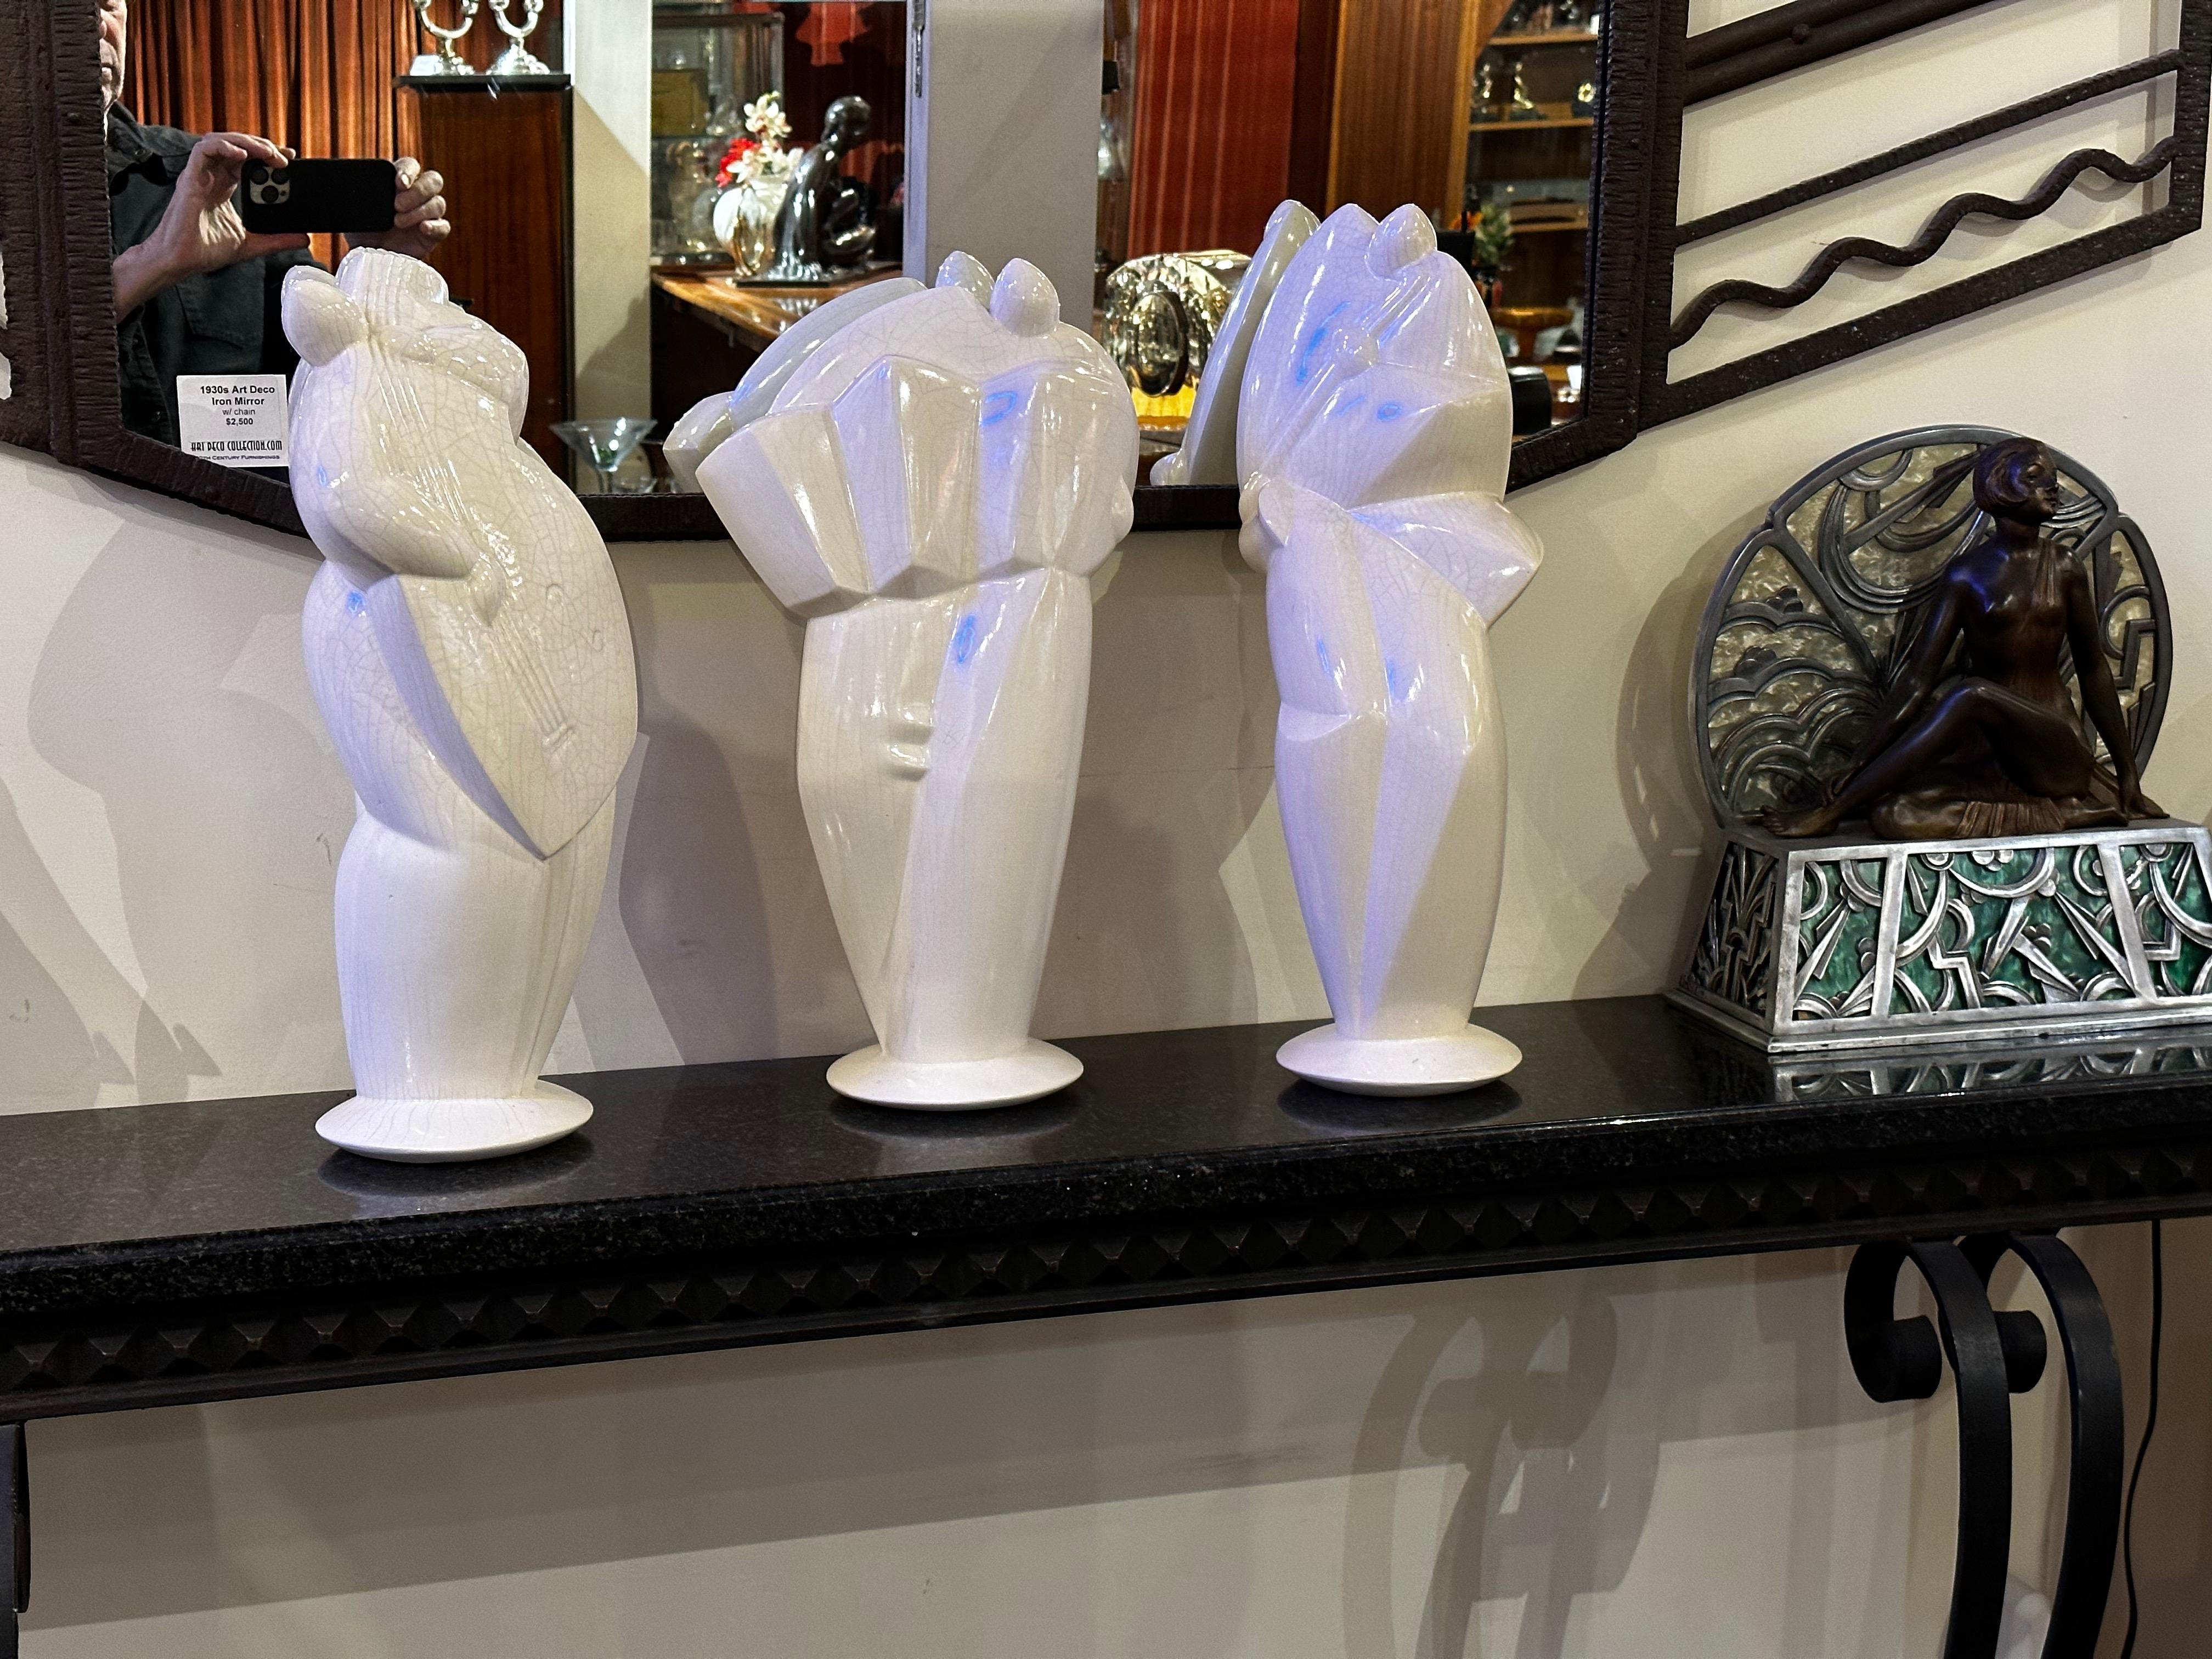 Three Cubist Art Deco style musicians sculptures in ceramic. These large statues are done in a French technique called Craquele (crackle ware). They are signed and numbered “N.R” (Natacha Roche). Groups of ceramic musicians like these are very rare